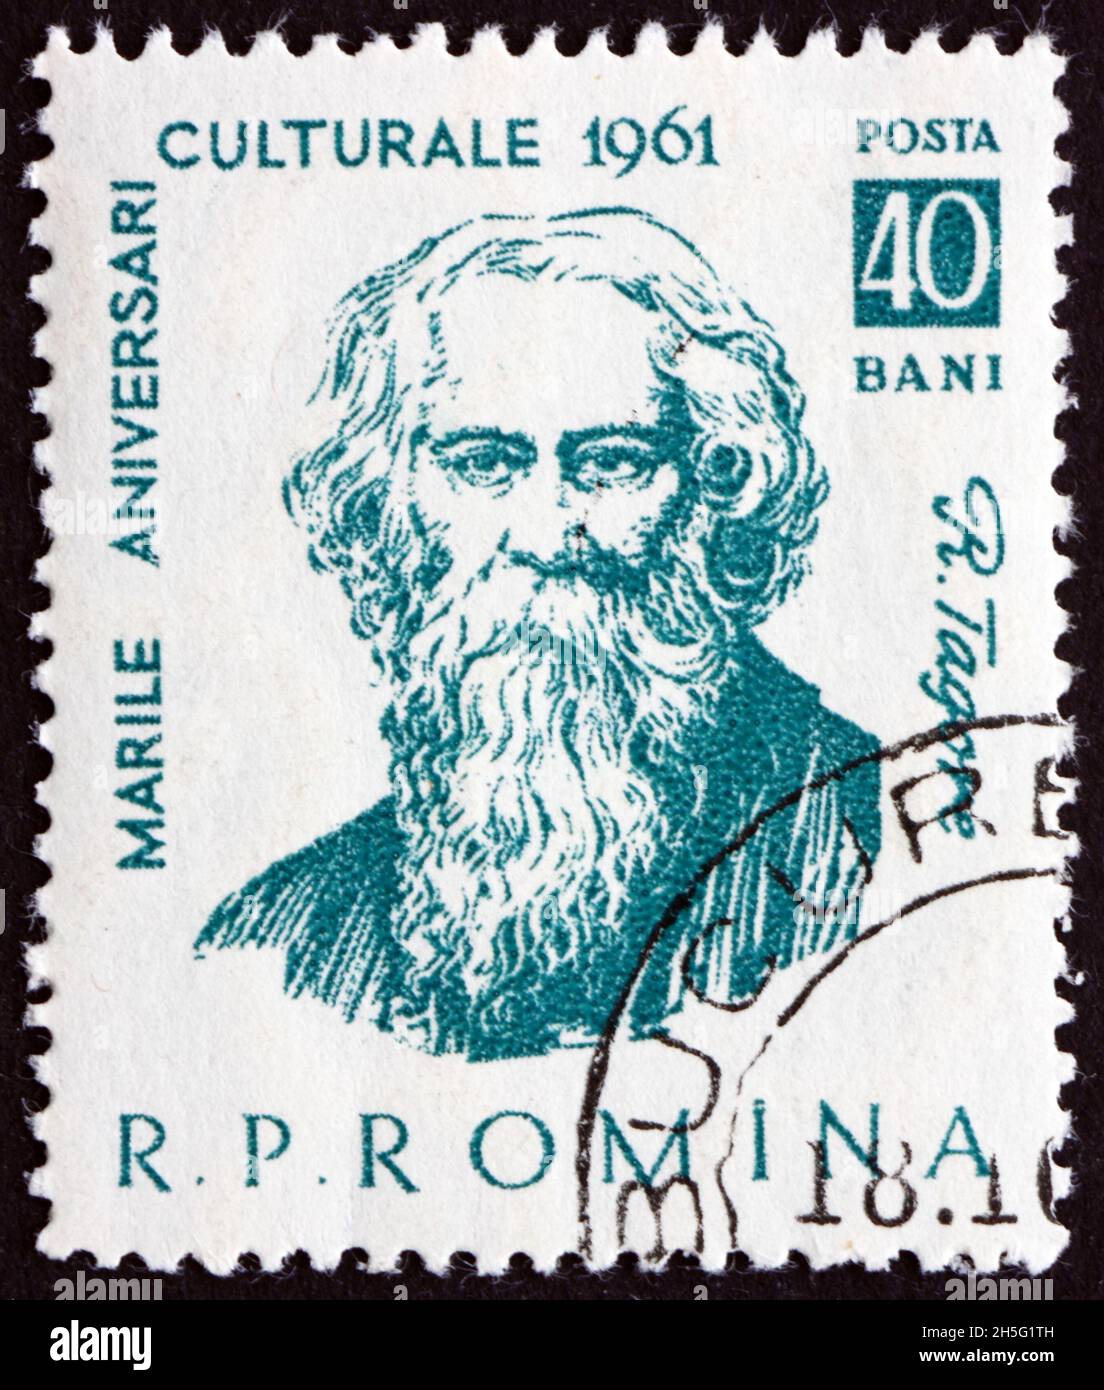 ROMANIA - CIRCA 1961: a stamp printed in Romania shows Rabindranath Tagore, was a polymath, poet, musician and artist from the Indian subcontinent, ci Stock Photo